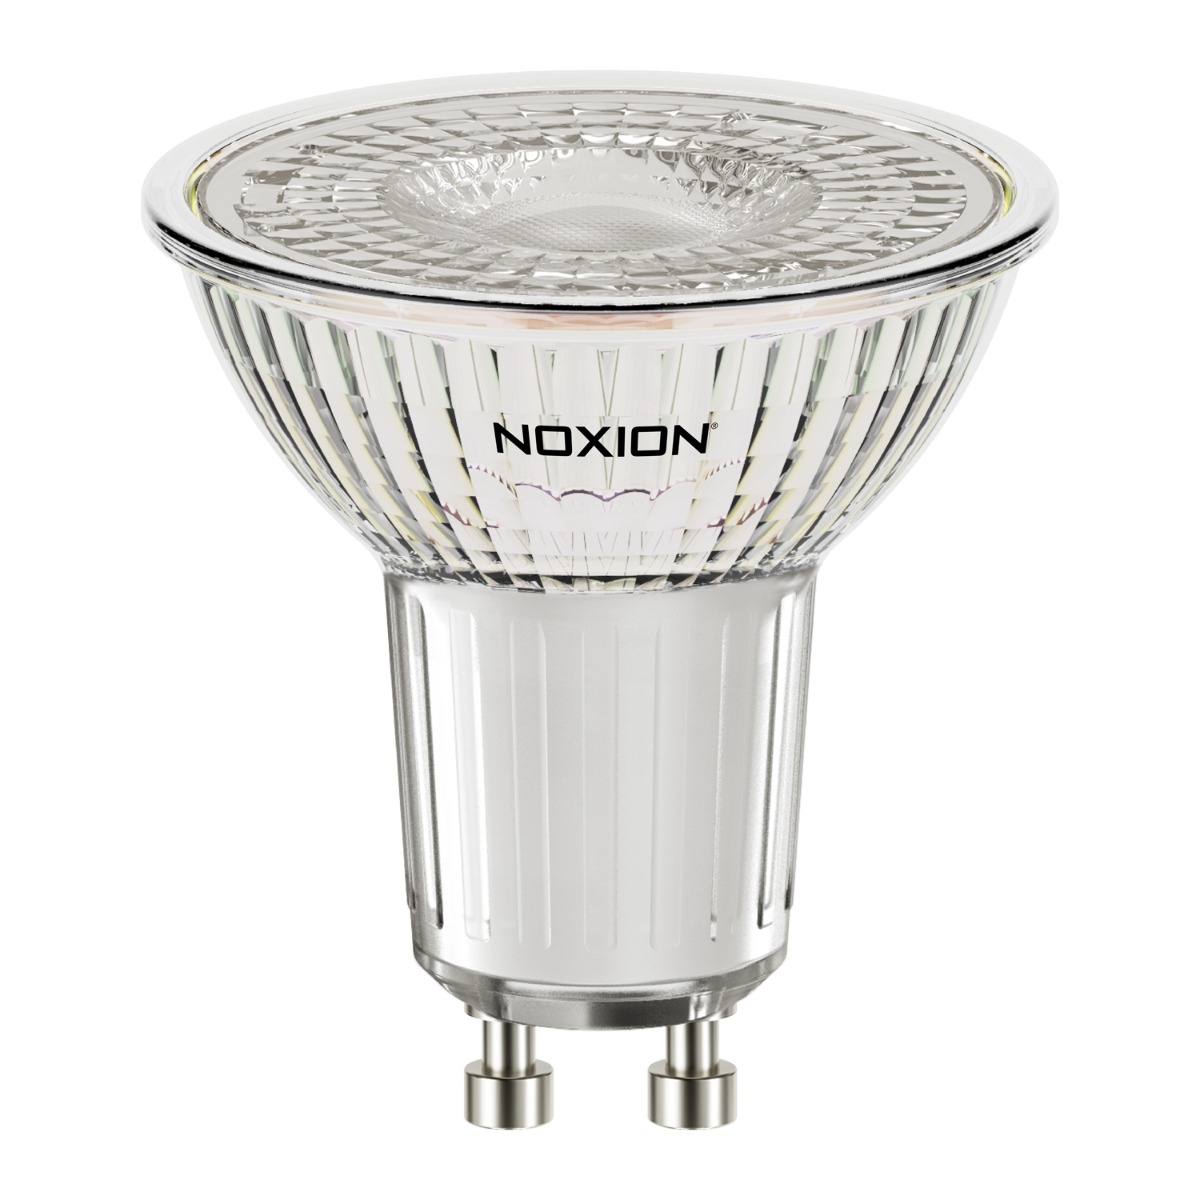 Noxion LED Spot PerfectColor GU10 4W 927 60D 310lm | Dimmable - Extra Warm White - Replaces 35W